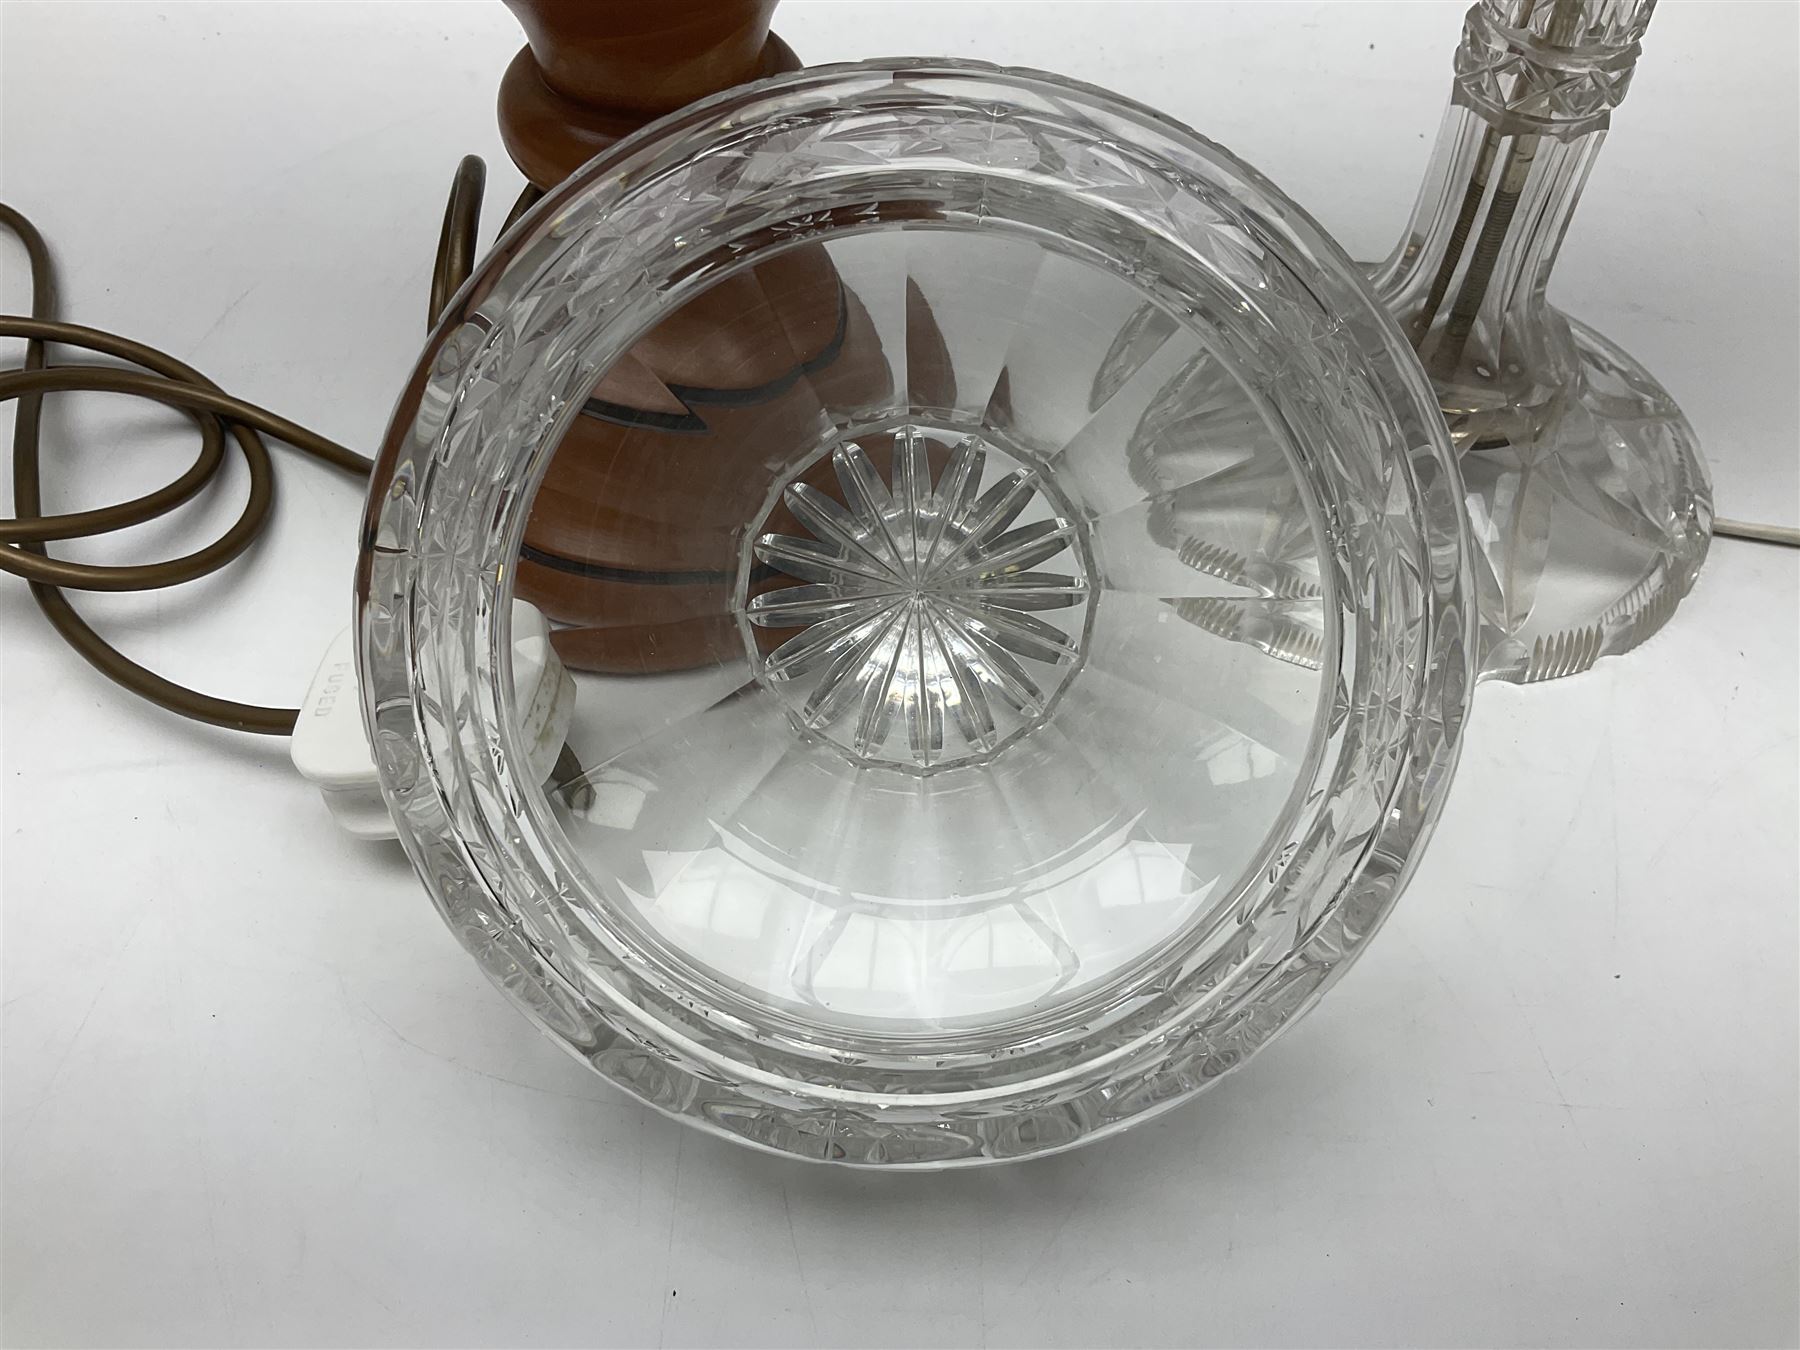 Mid 20th century cut glass table lamp with dome shade - Image 5 of 8